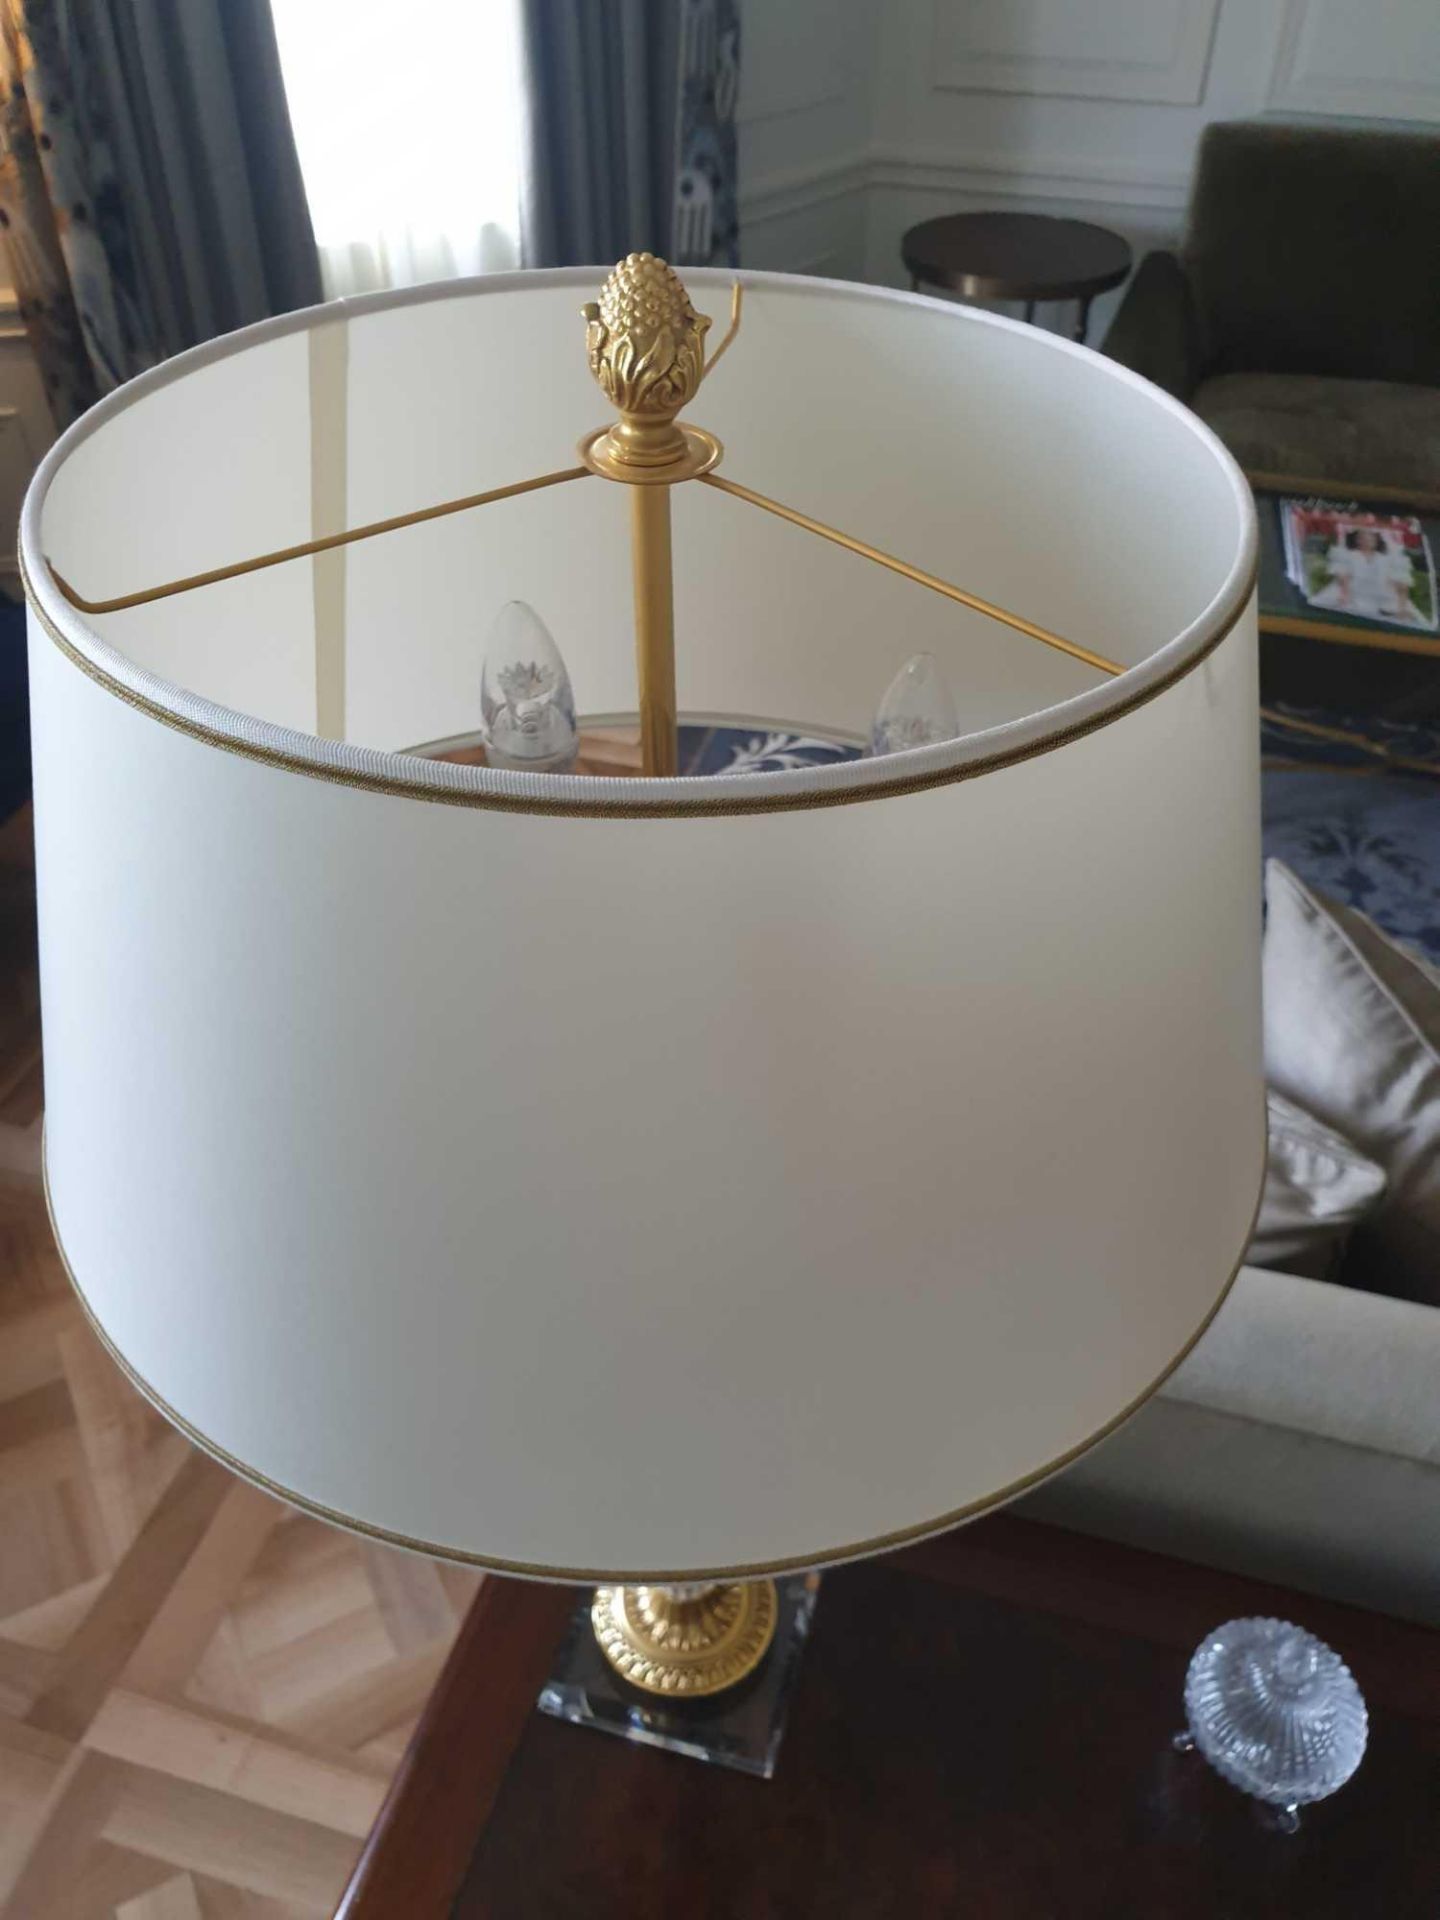 Laudarte Crystal Table Lamps Inserts And Decorations In 24ct Gold With Shade 95cm Tall (Room 702 & - Image 3 of 3